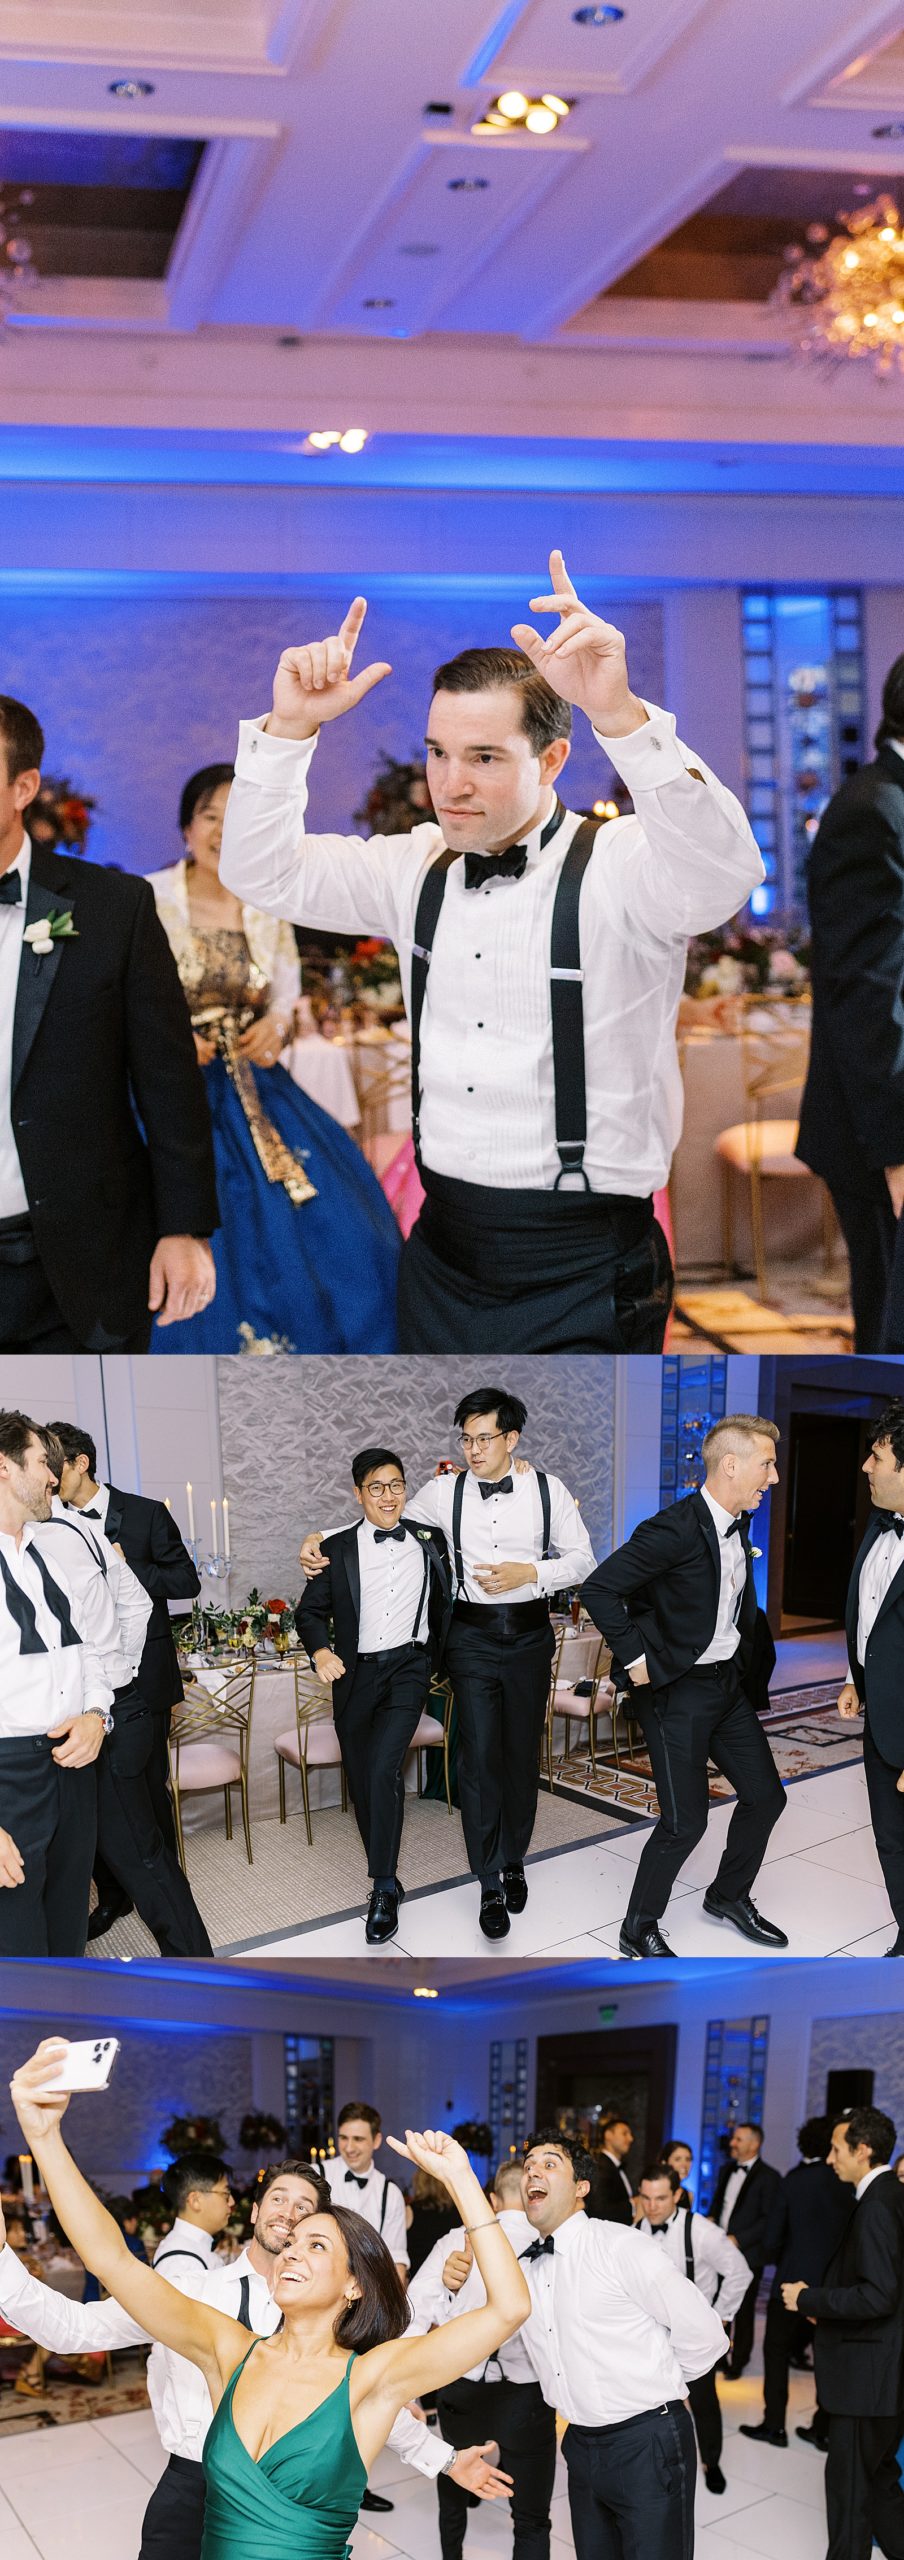 Guest dancing at a large indoor wedding reception in Boston by photographer, Lynne Reznick. 